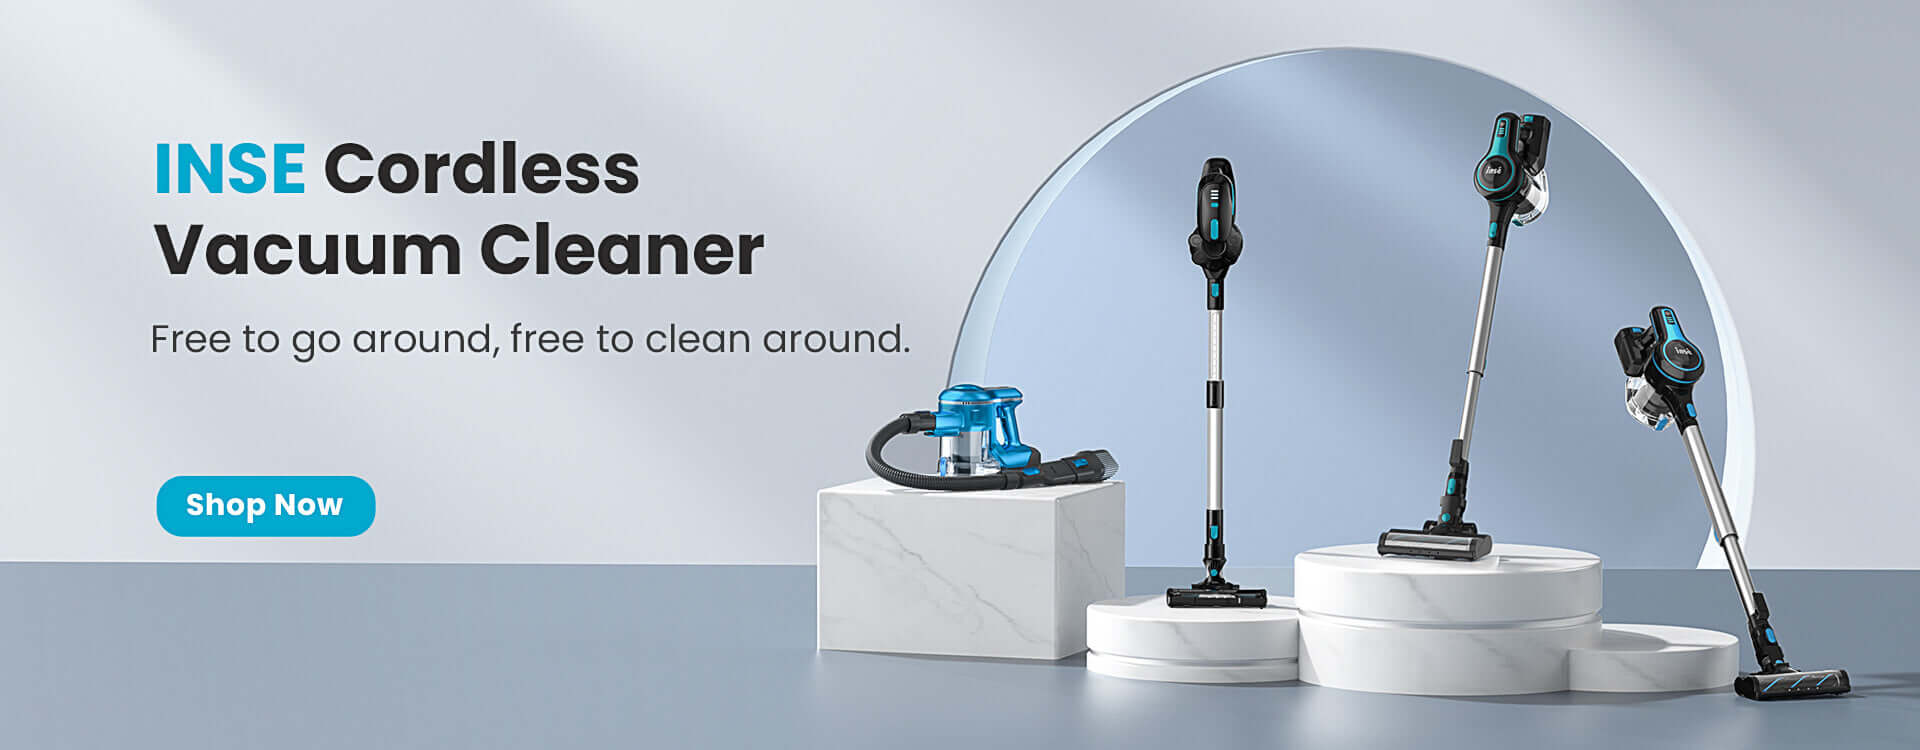 inse cordless vacuum cleaners-inselife.com